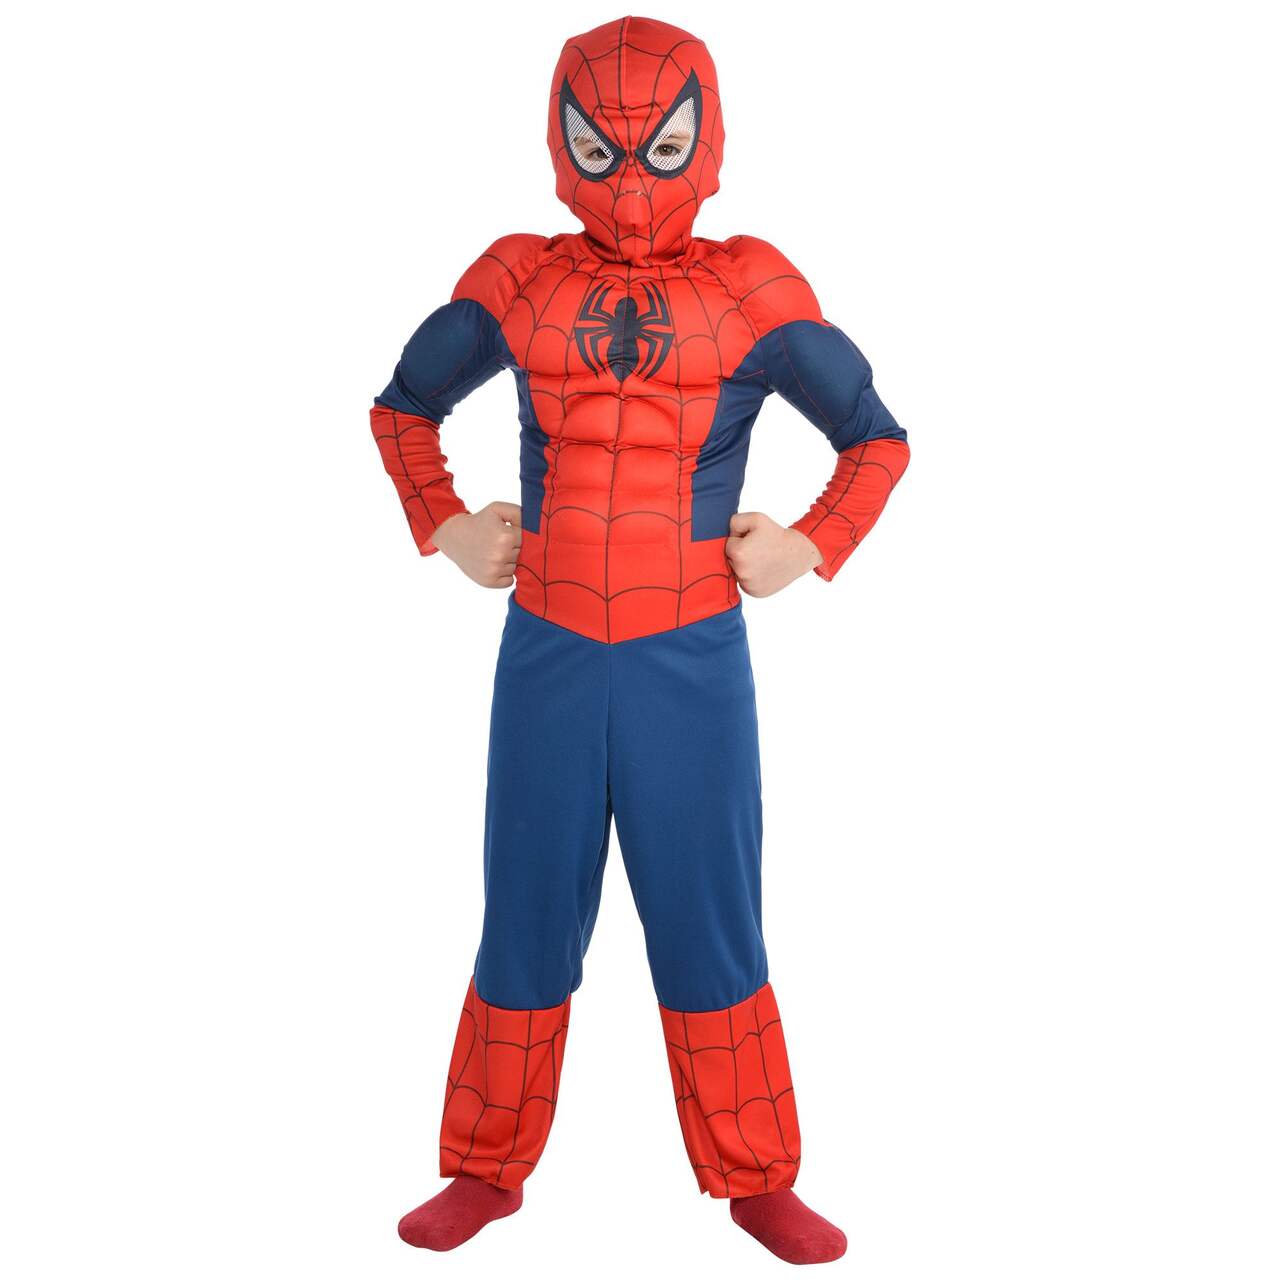 https://media-www.canadiantire.ca/product/automotive/party-city-seasonal/party-city-halloween-costumes/8510102/185-child-classic-spider-man-muscle-costume-small-4-6--ce7eb047-3733-425f-8fe2-a70be9d88d71-jpgrendition.jpg?imdensity=1&imwidth=1244&impolicy=mZoom